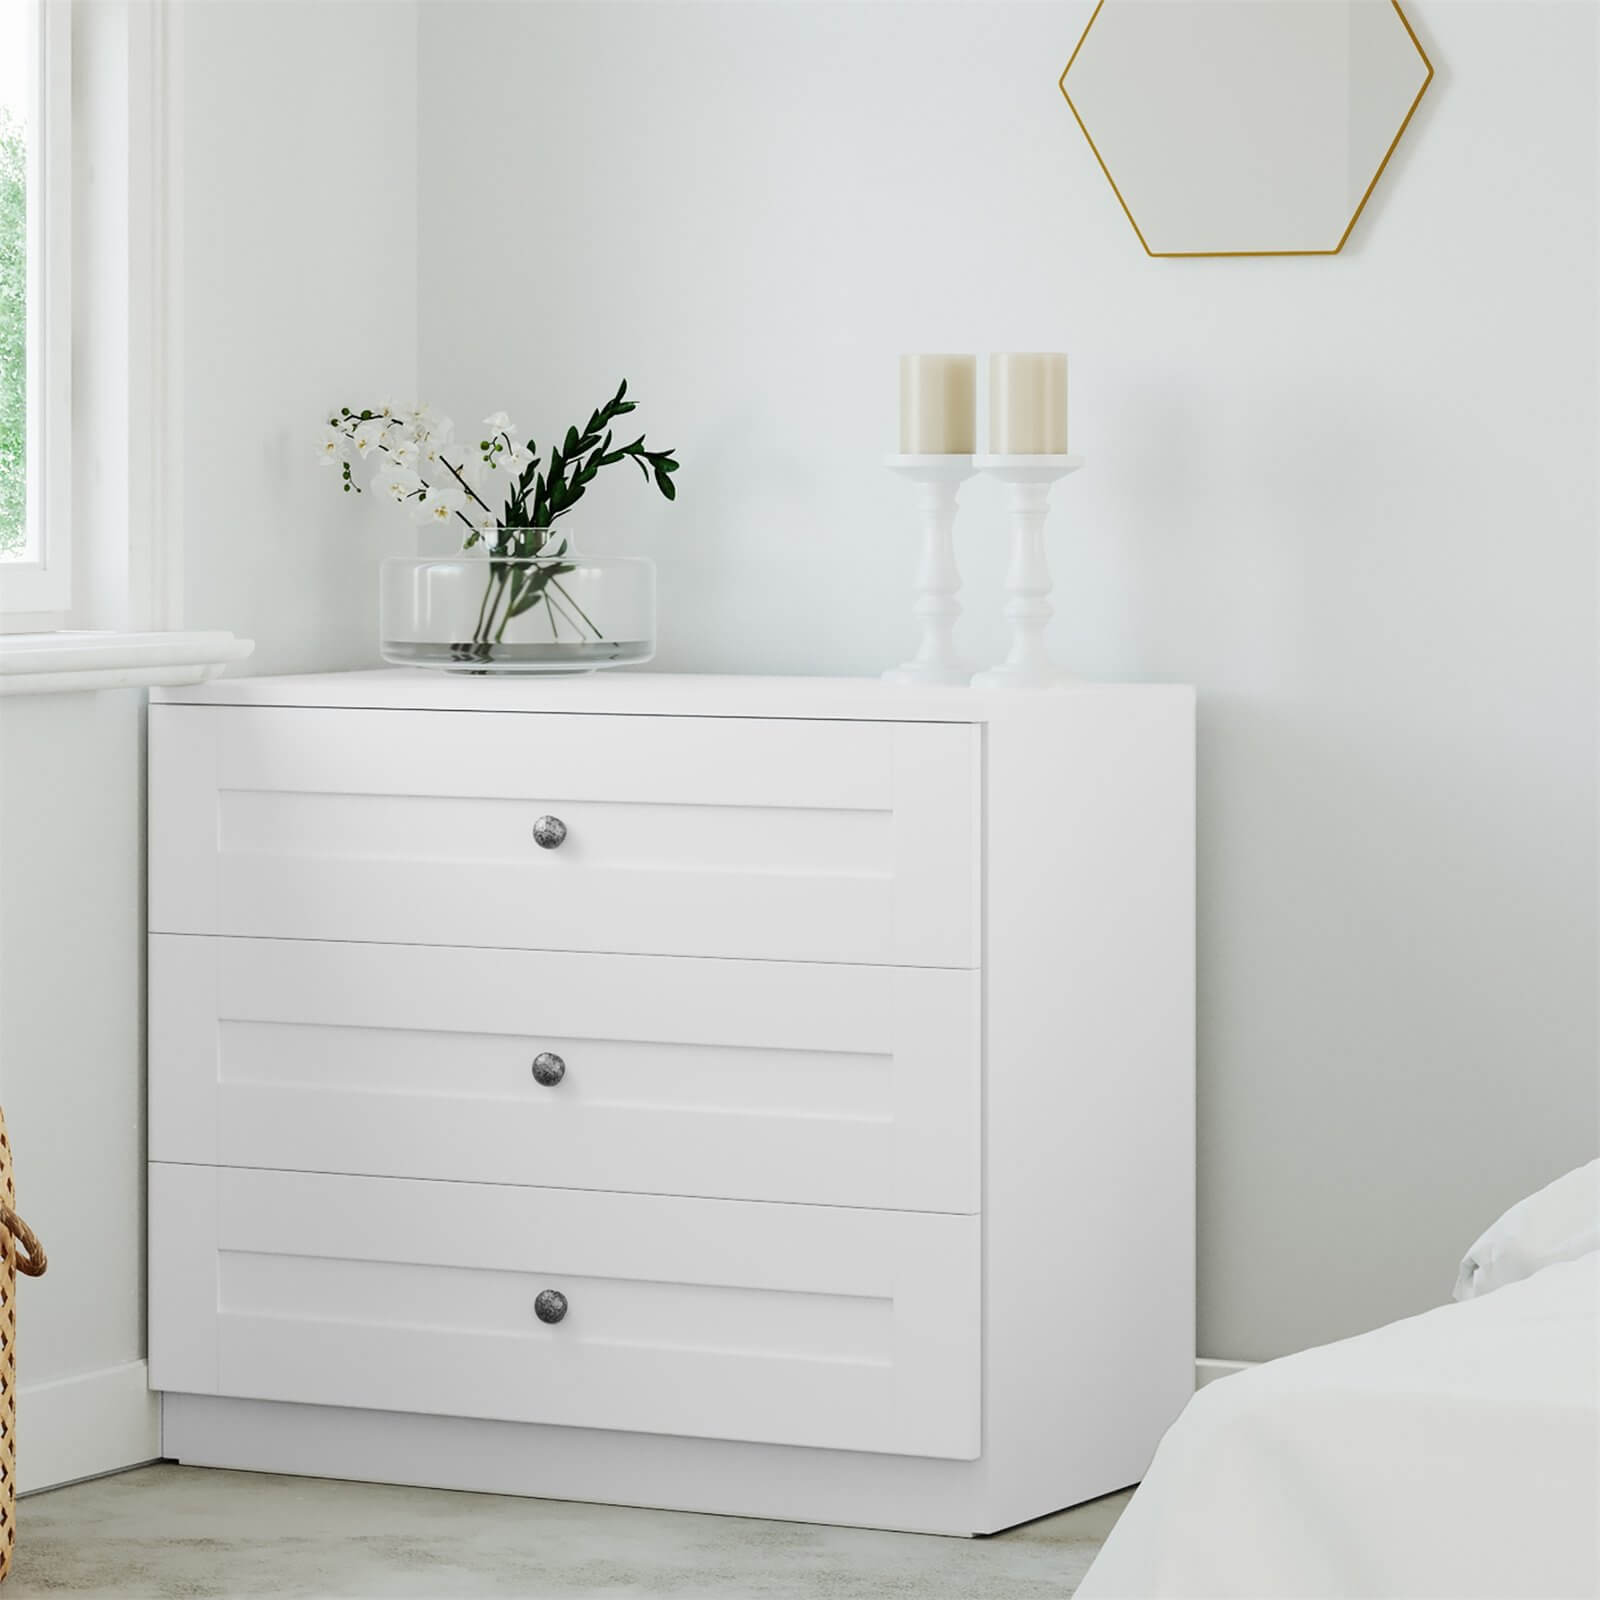 Fitted Bedroom Shaker 3 Drawer Chest - White